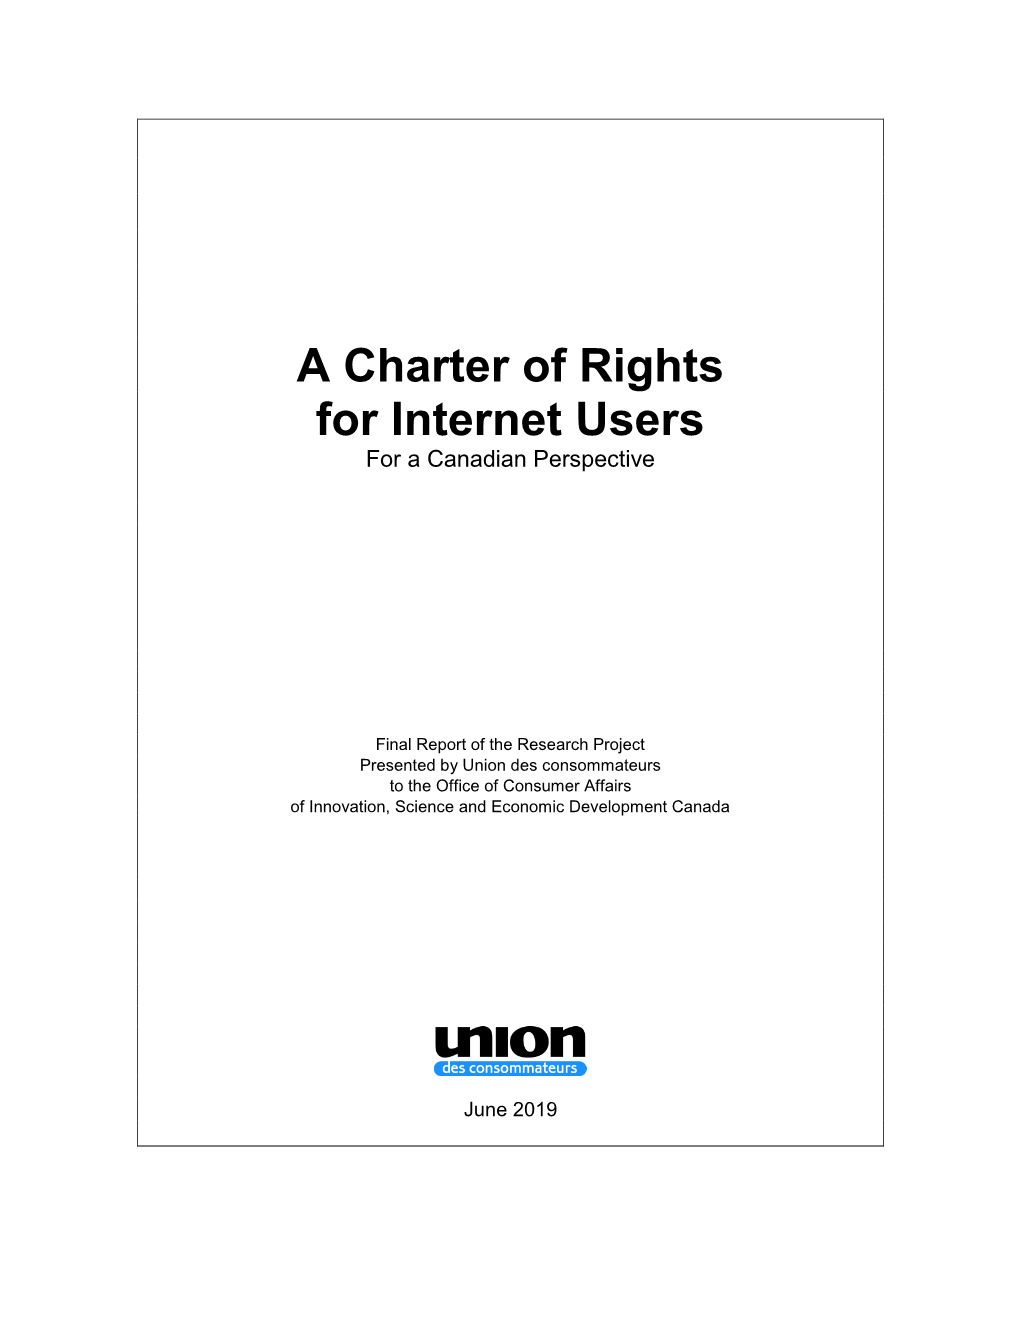 A Charter of Rights for Internet Users for a Canadian Perspective